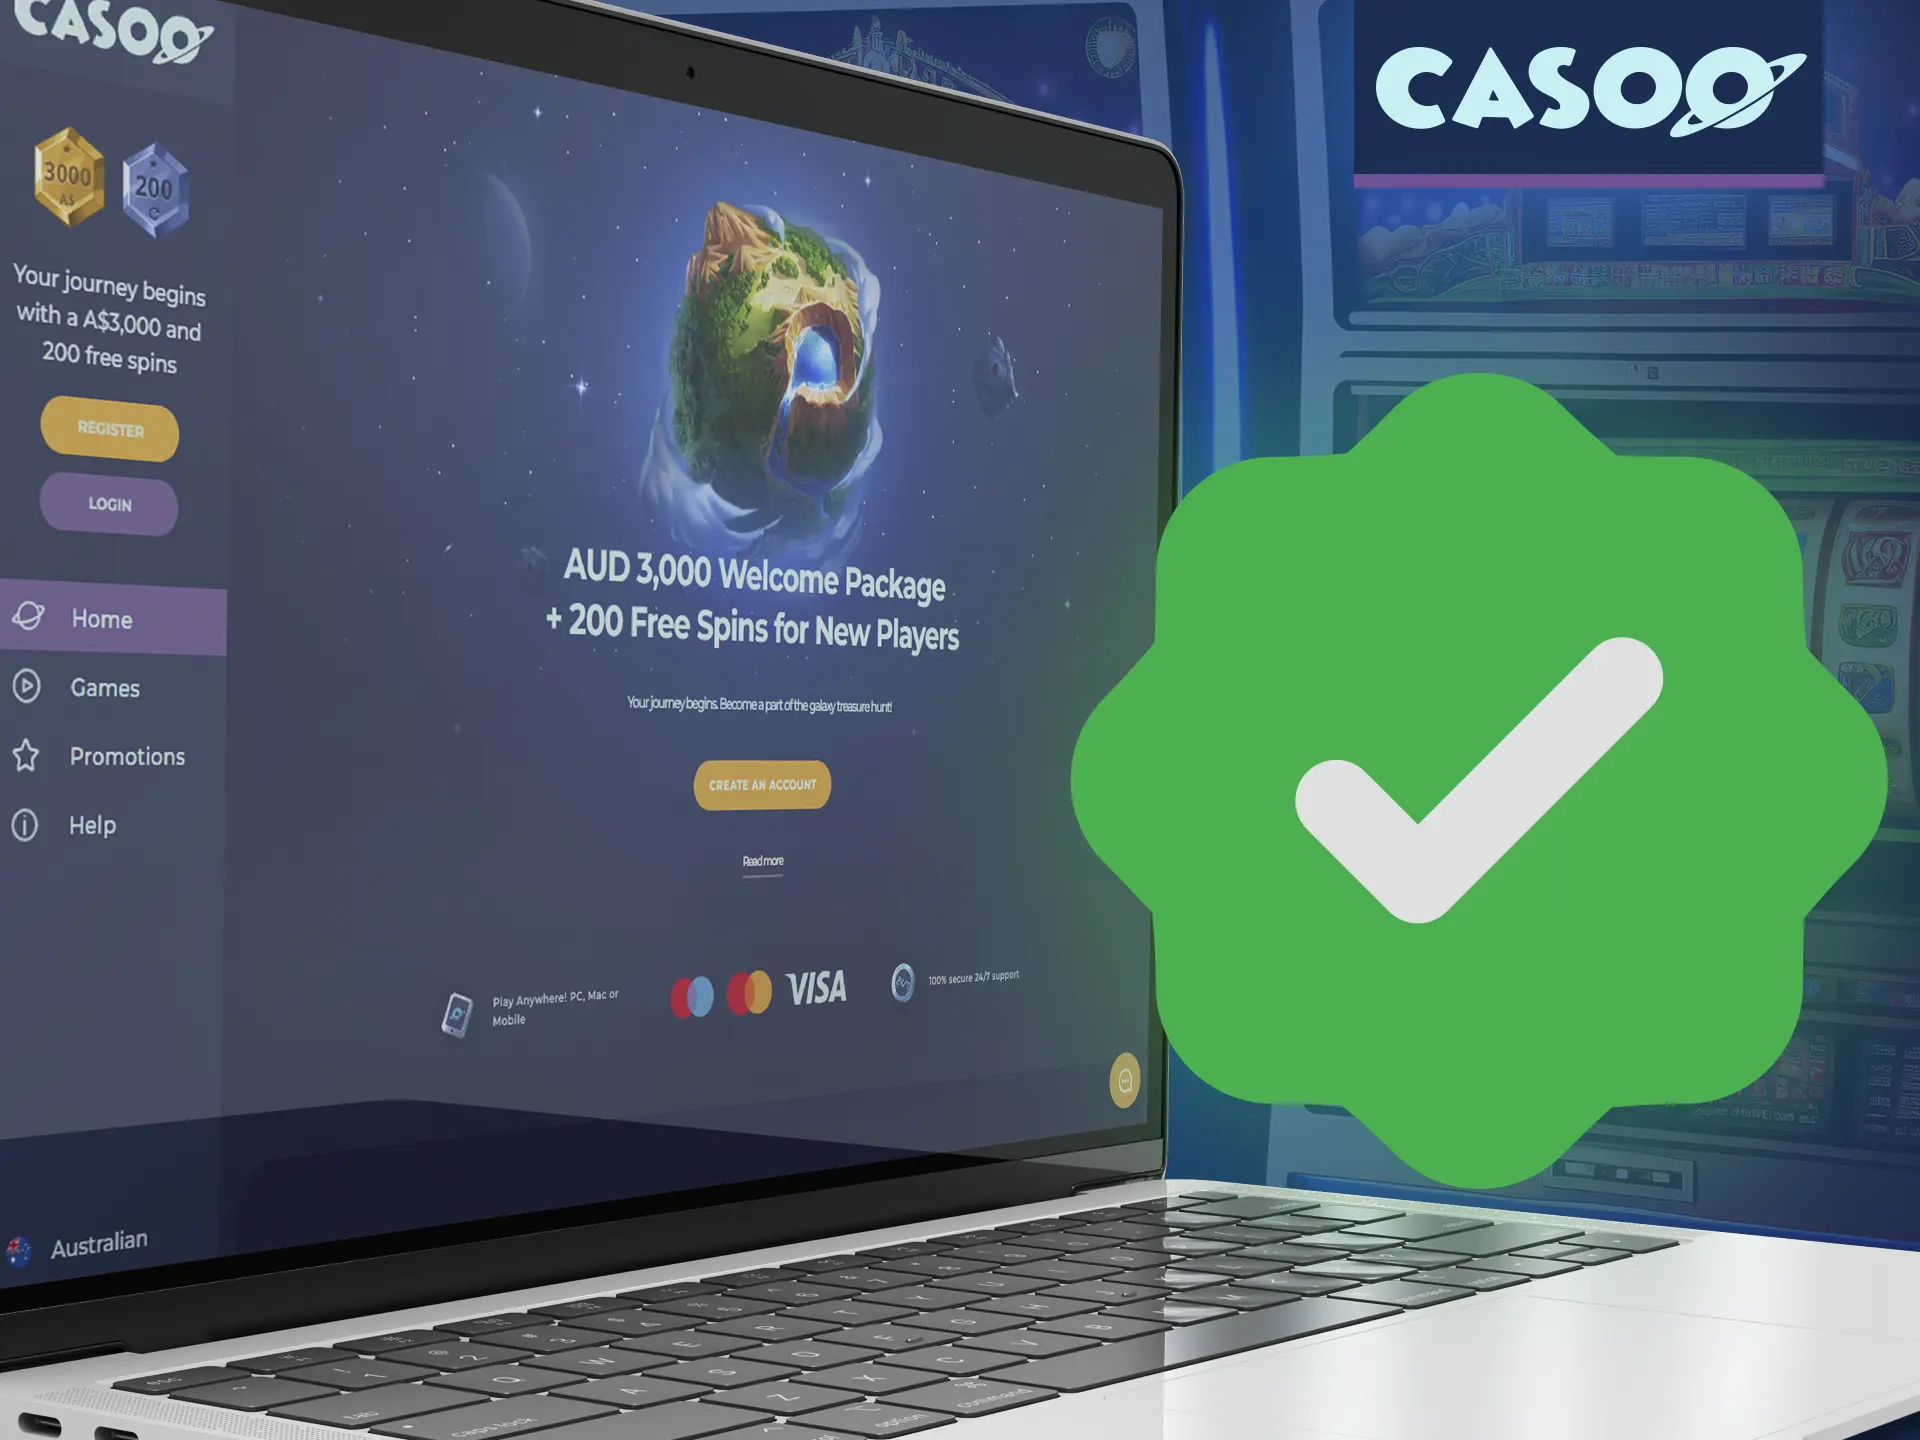 Check the verification steps to start playing at Casoo online casino.